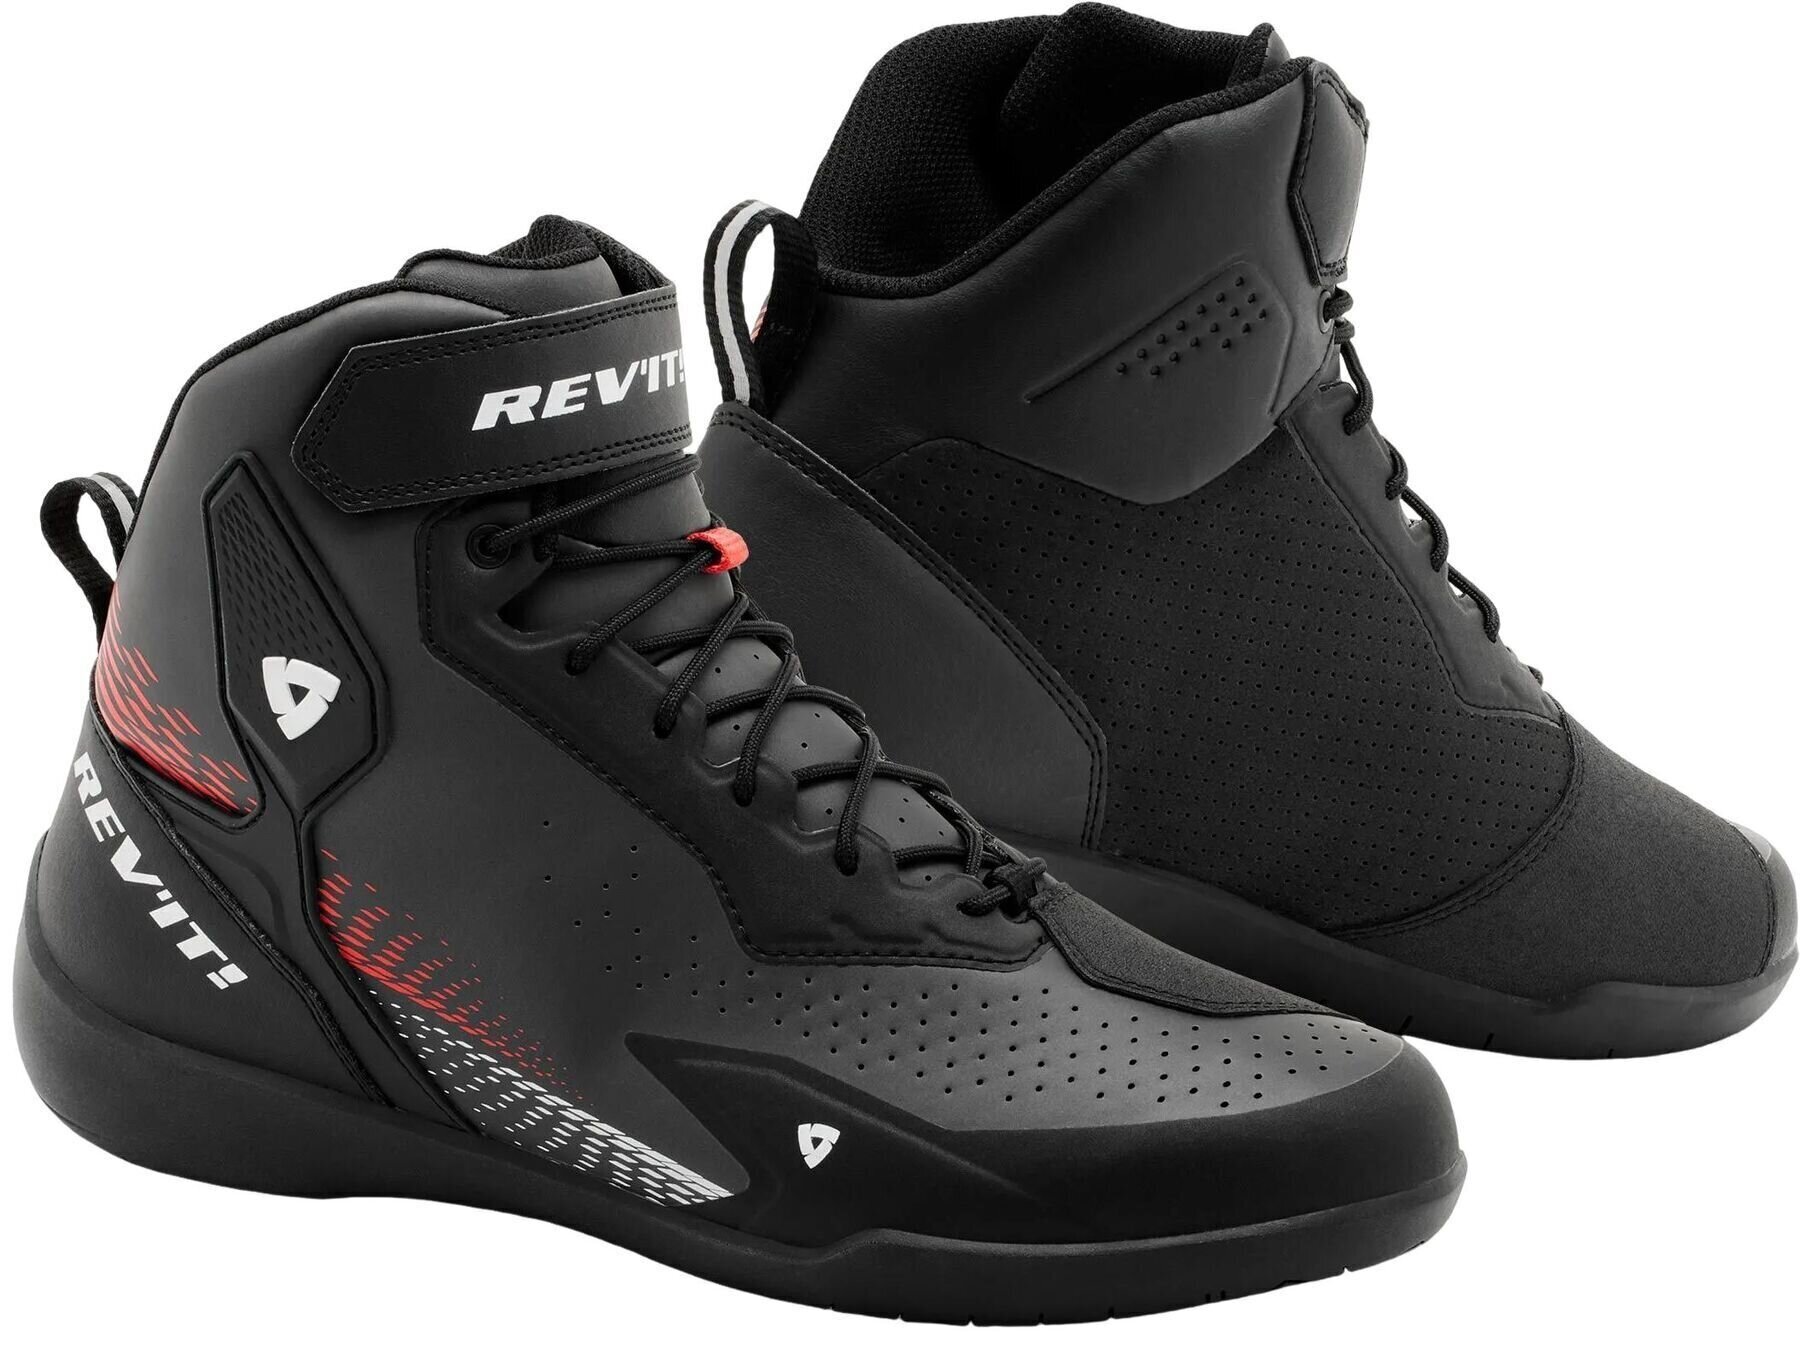 Motorcycle Boots Rev'it! Shoes G-Force 2 Black/Neon Red 42 Motorcycle Boots